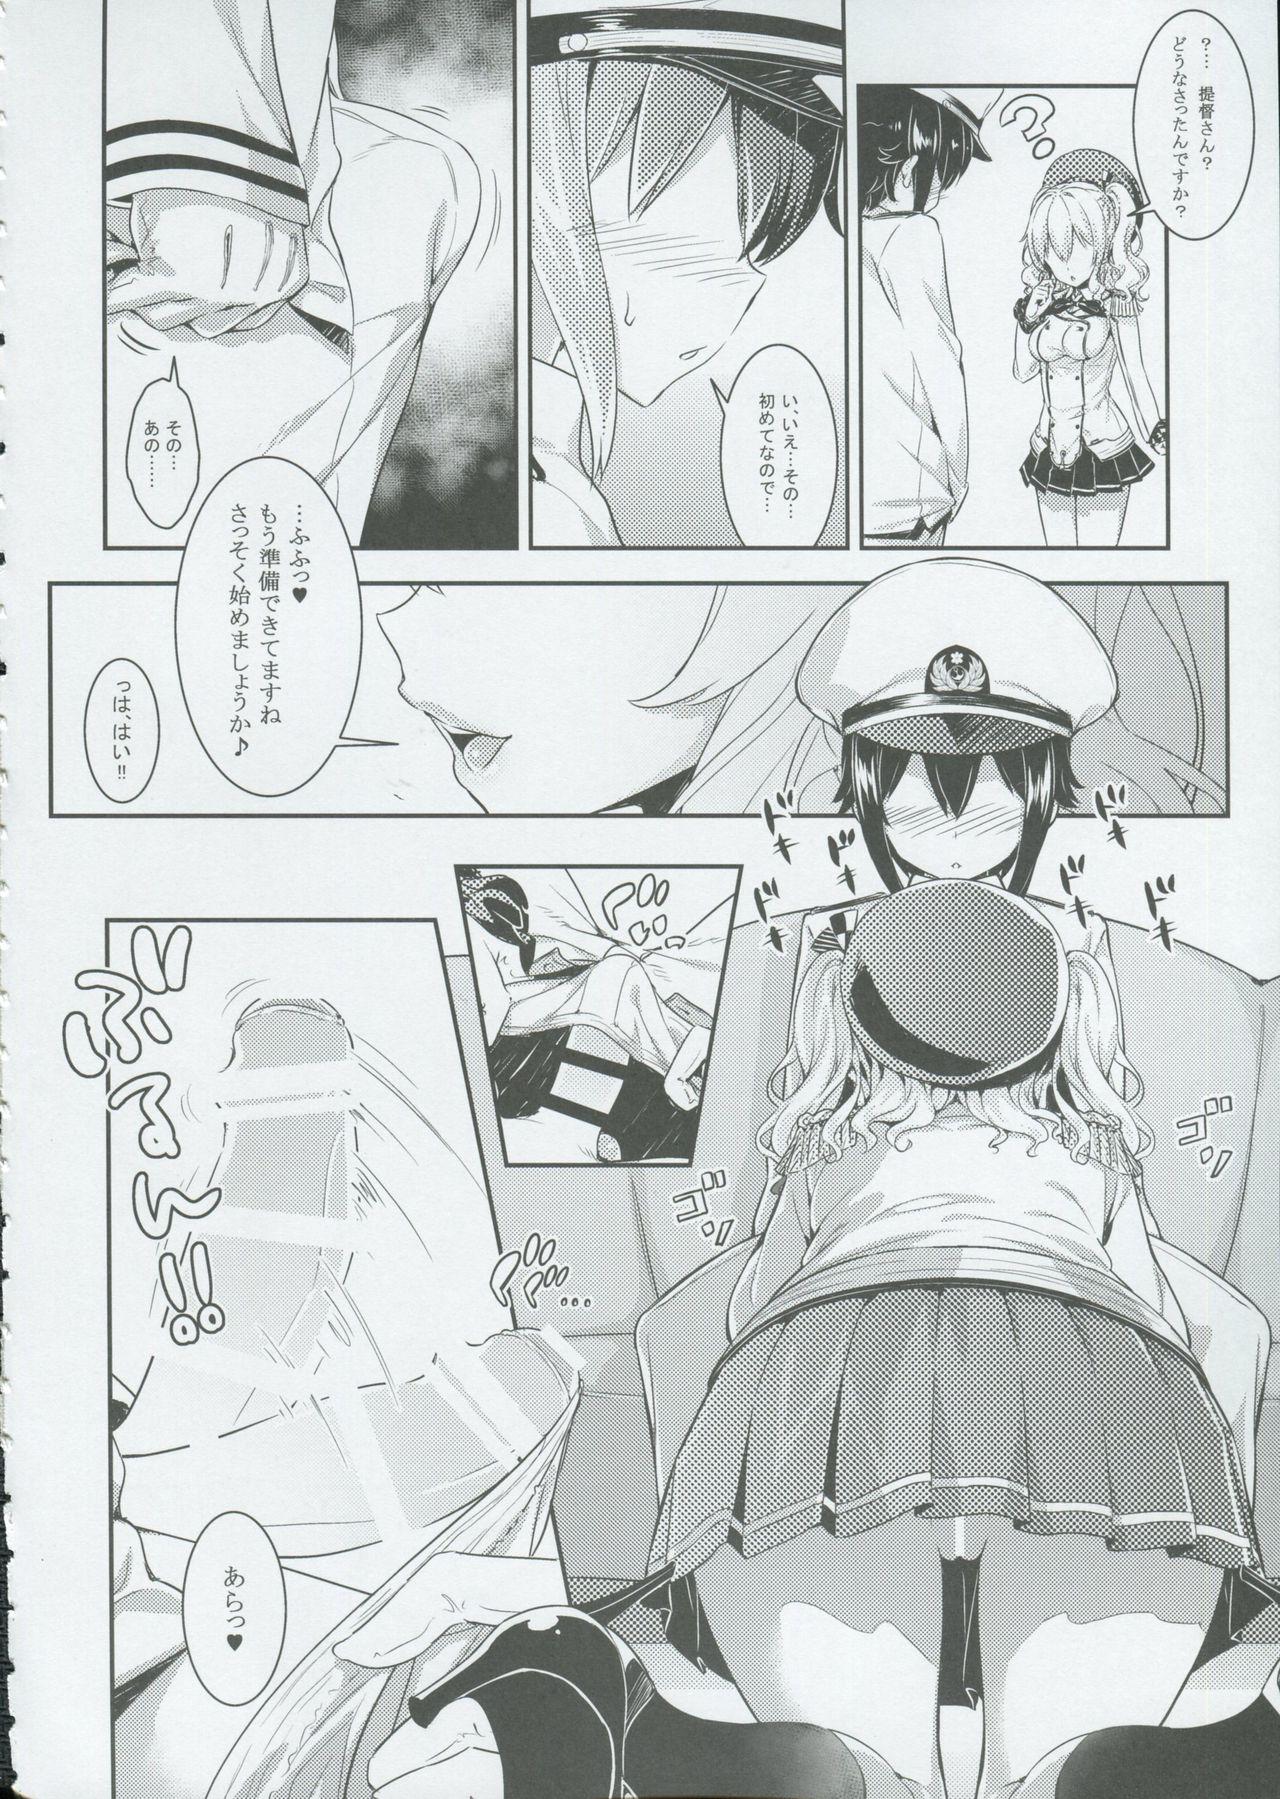 Lesbian Porn Let's Practice - Kantai collection 18 Year Old Porn - Page 5